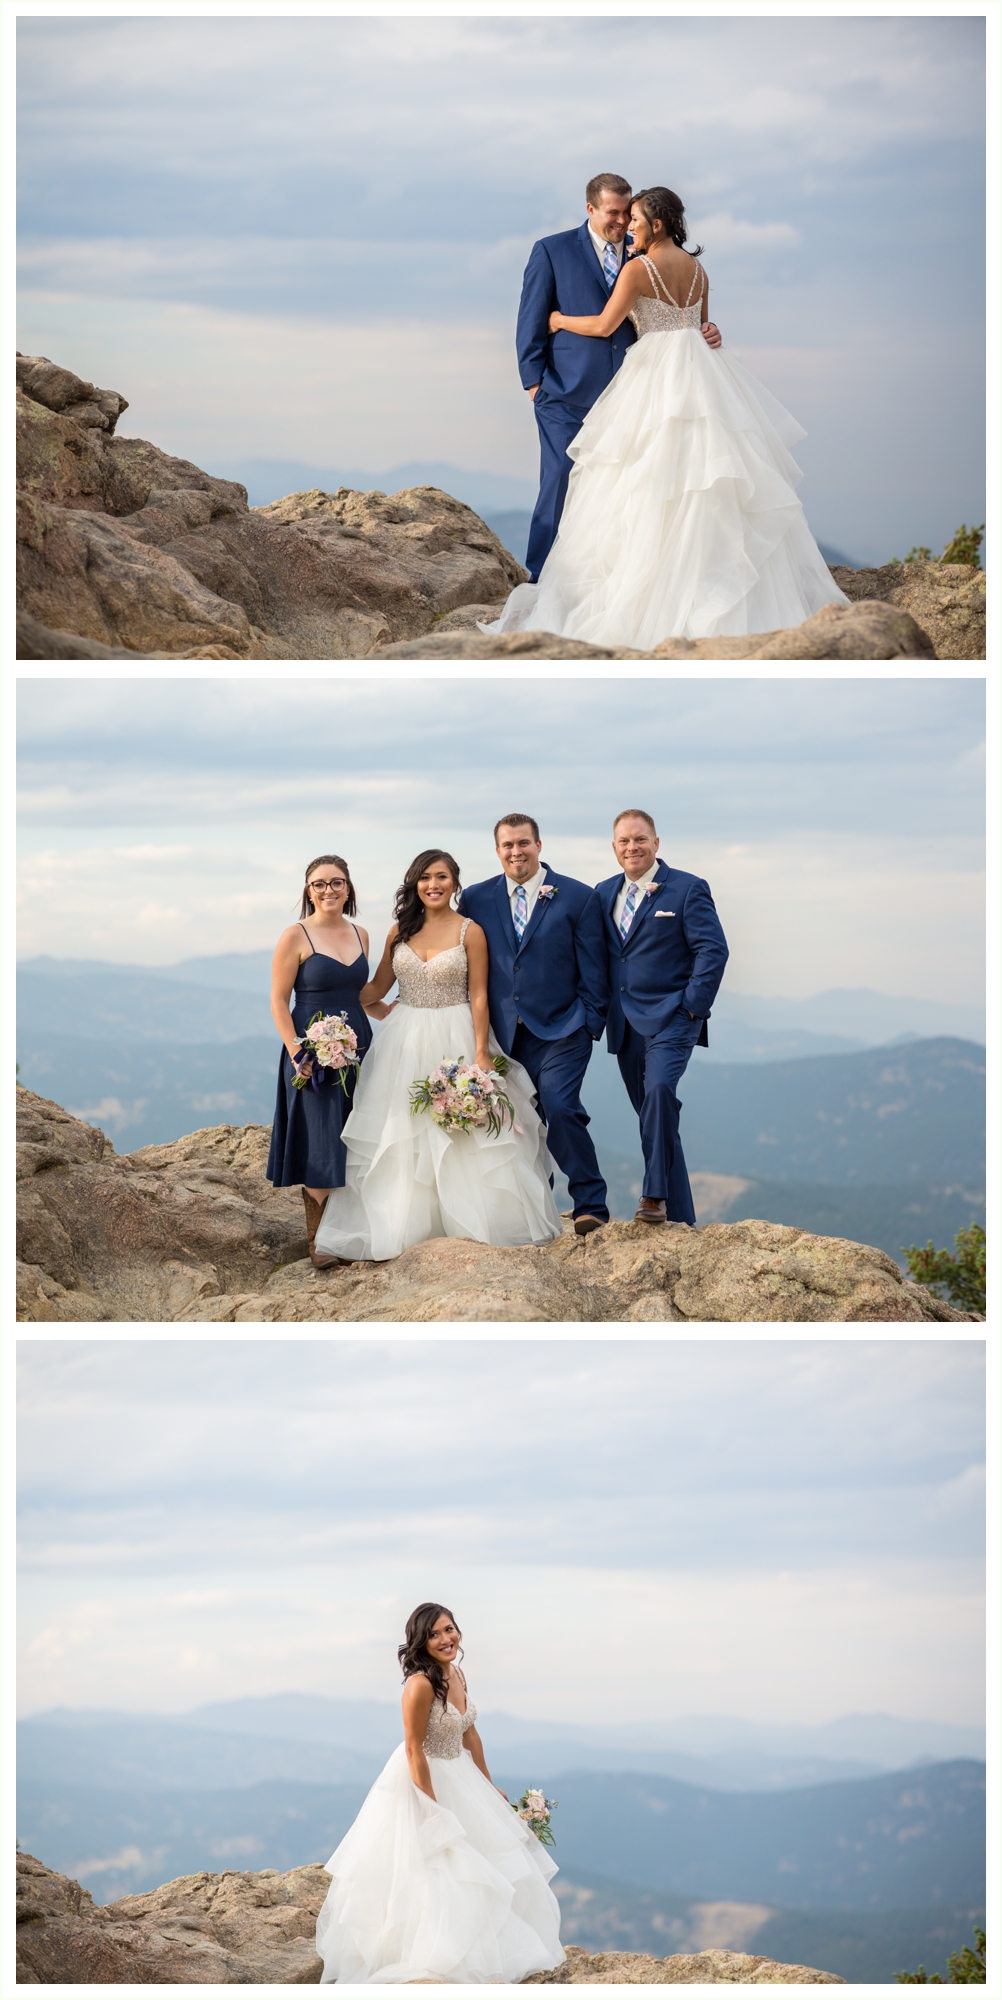 lost gulch lookout bride groom wedding day and bridal party portraits